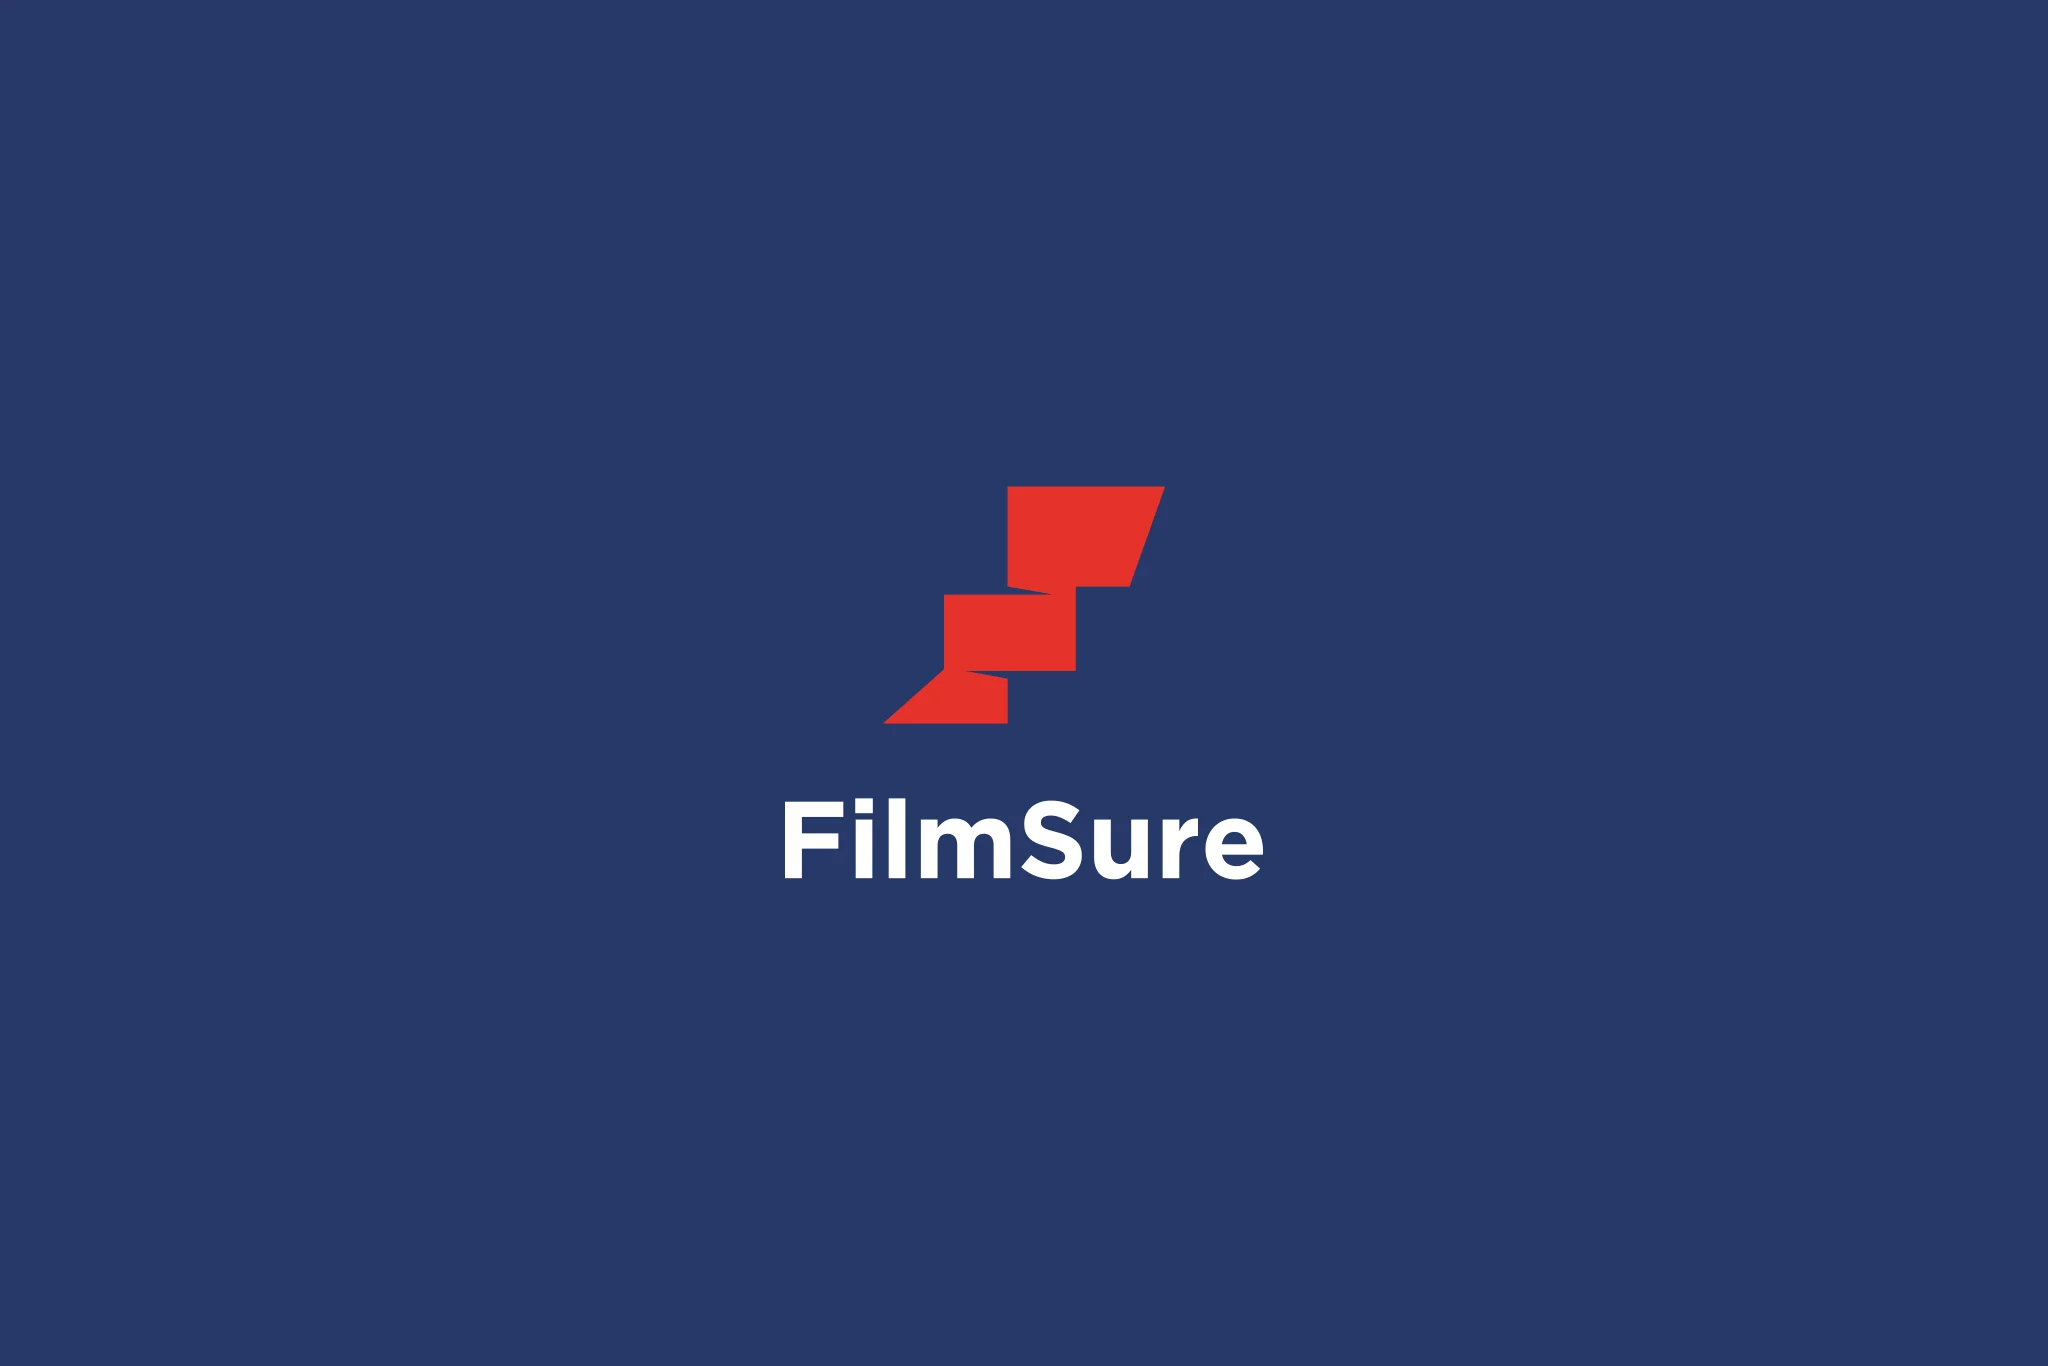 A logo for a film insurance company designed by one of the leading graphic design companies in South Africa, 2Colour Bean